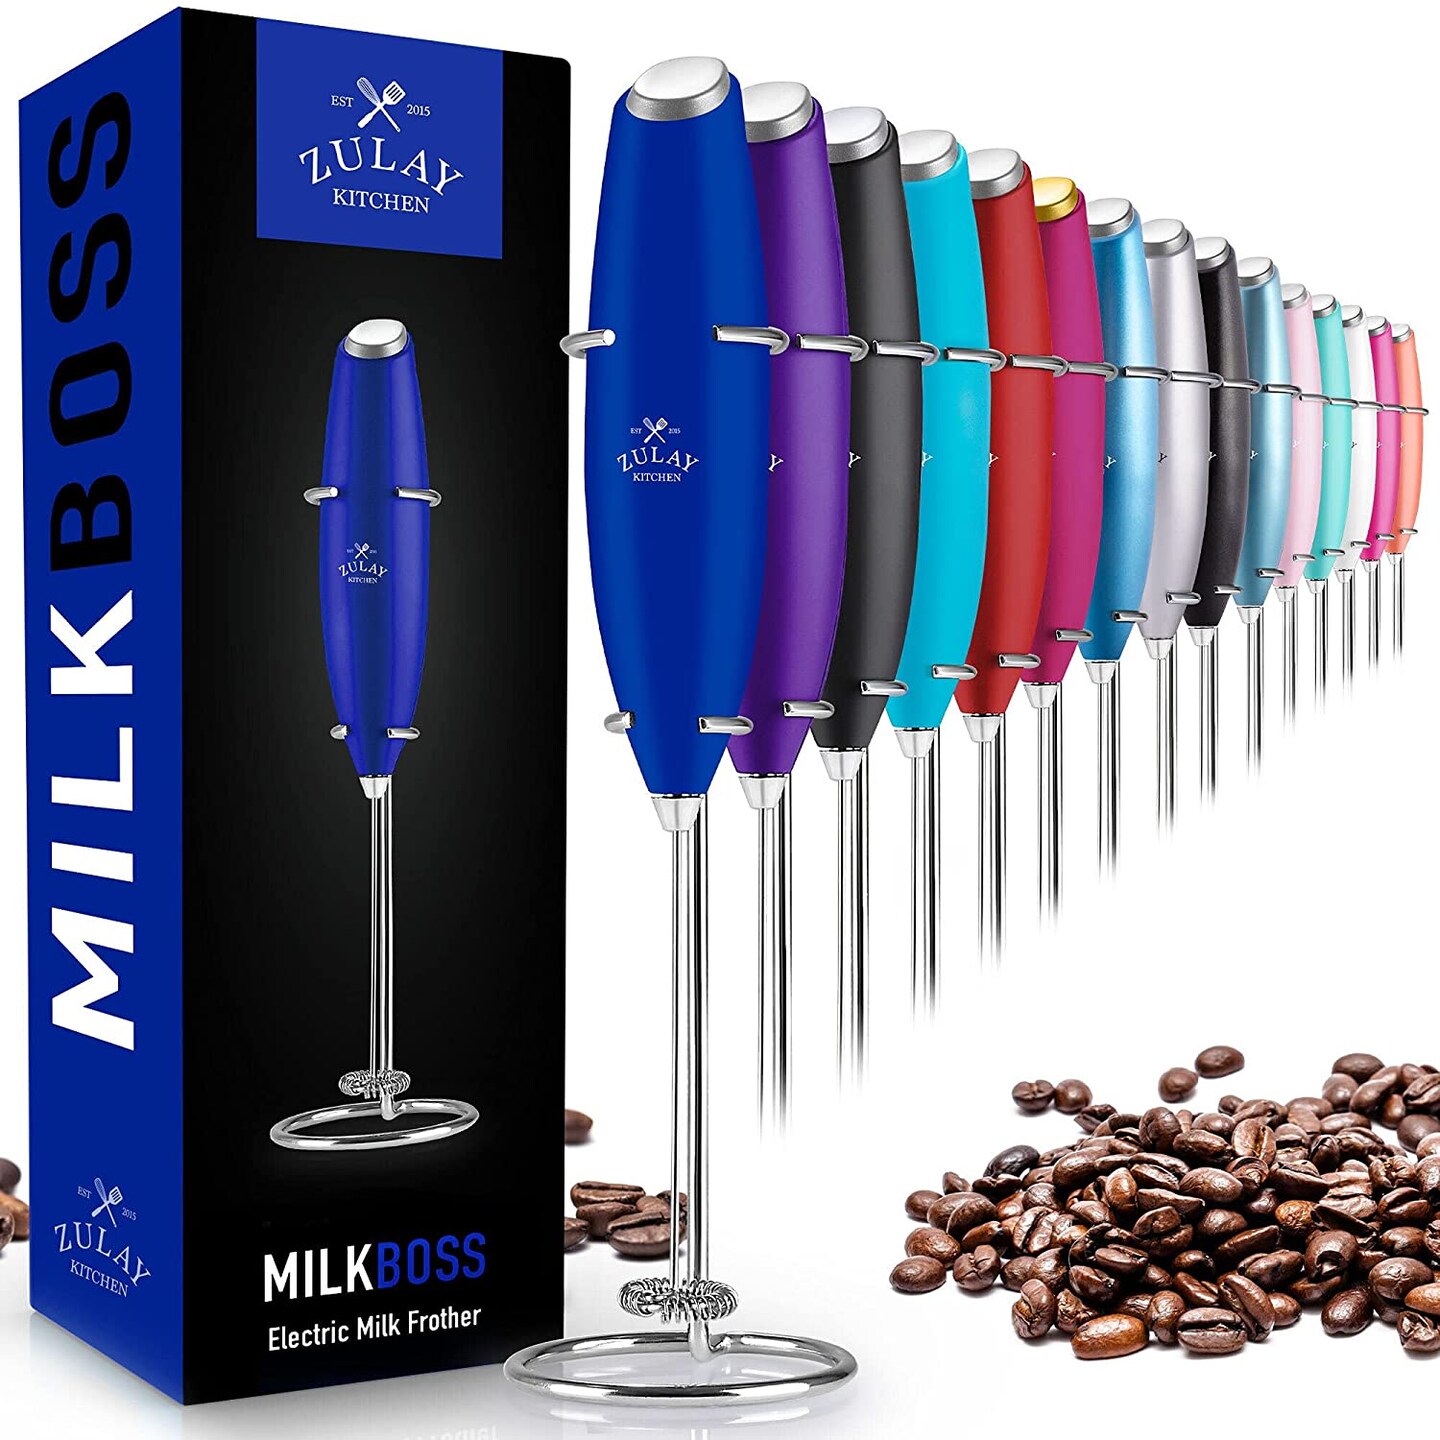 Zulay ZK Milk Frother OG w Stand - Royal Blue